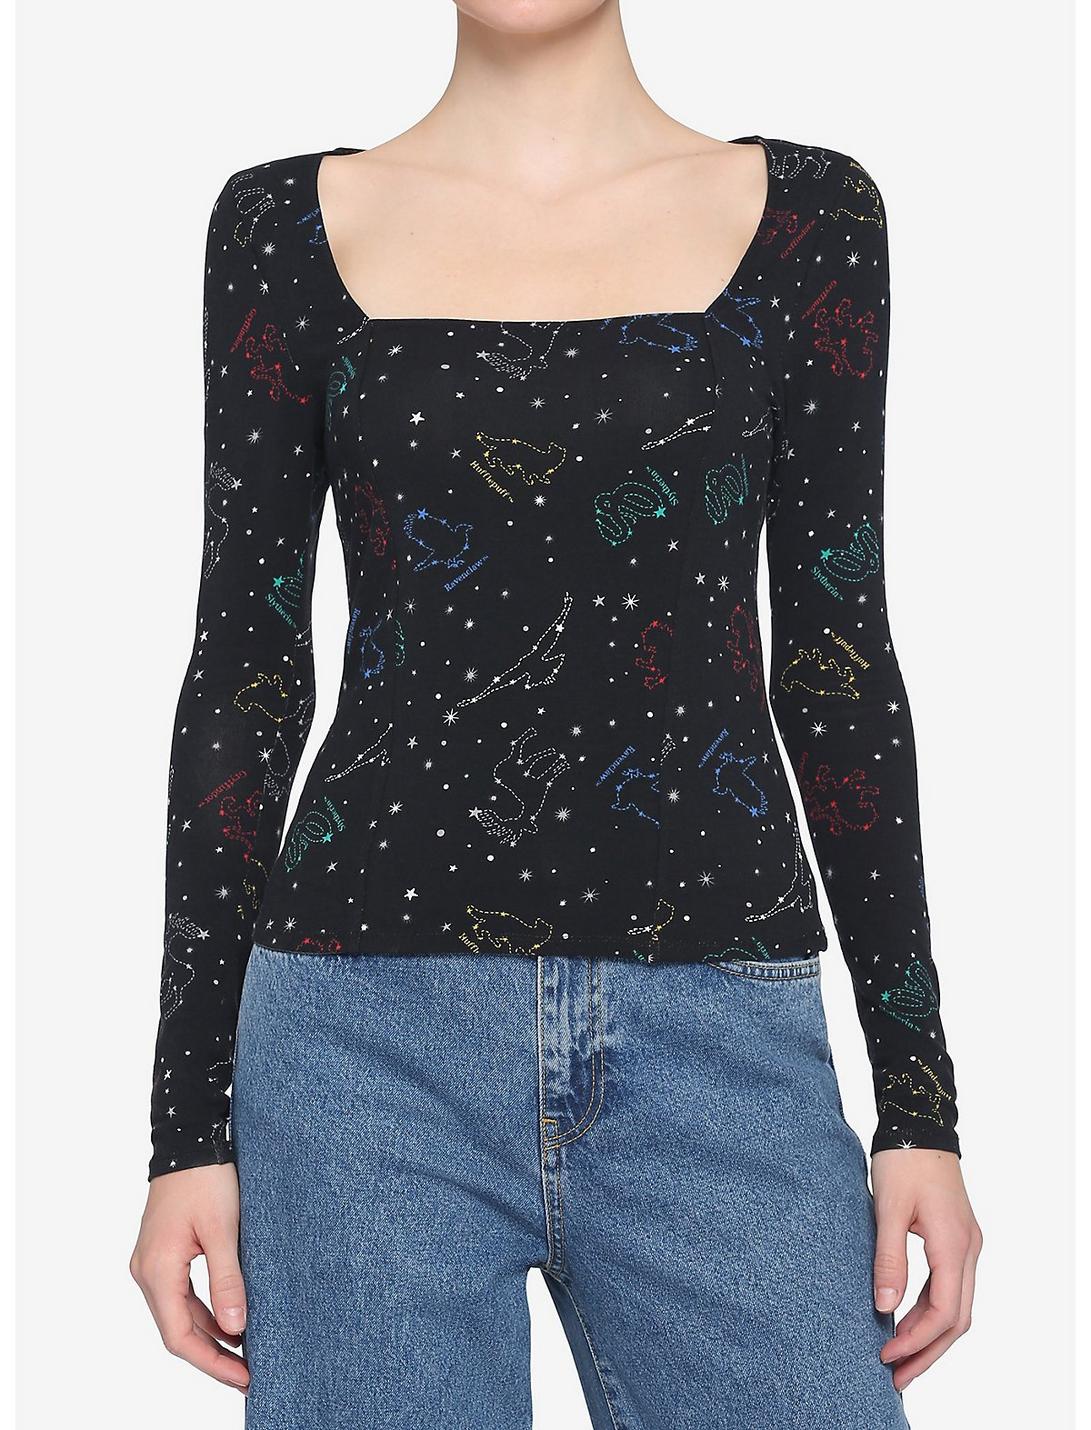 Harry Potter Constellation Long-Sleeve Top, MULTI, hi-res